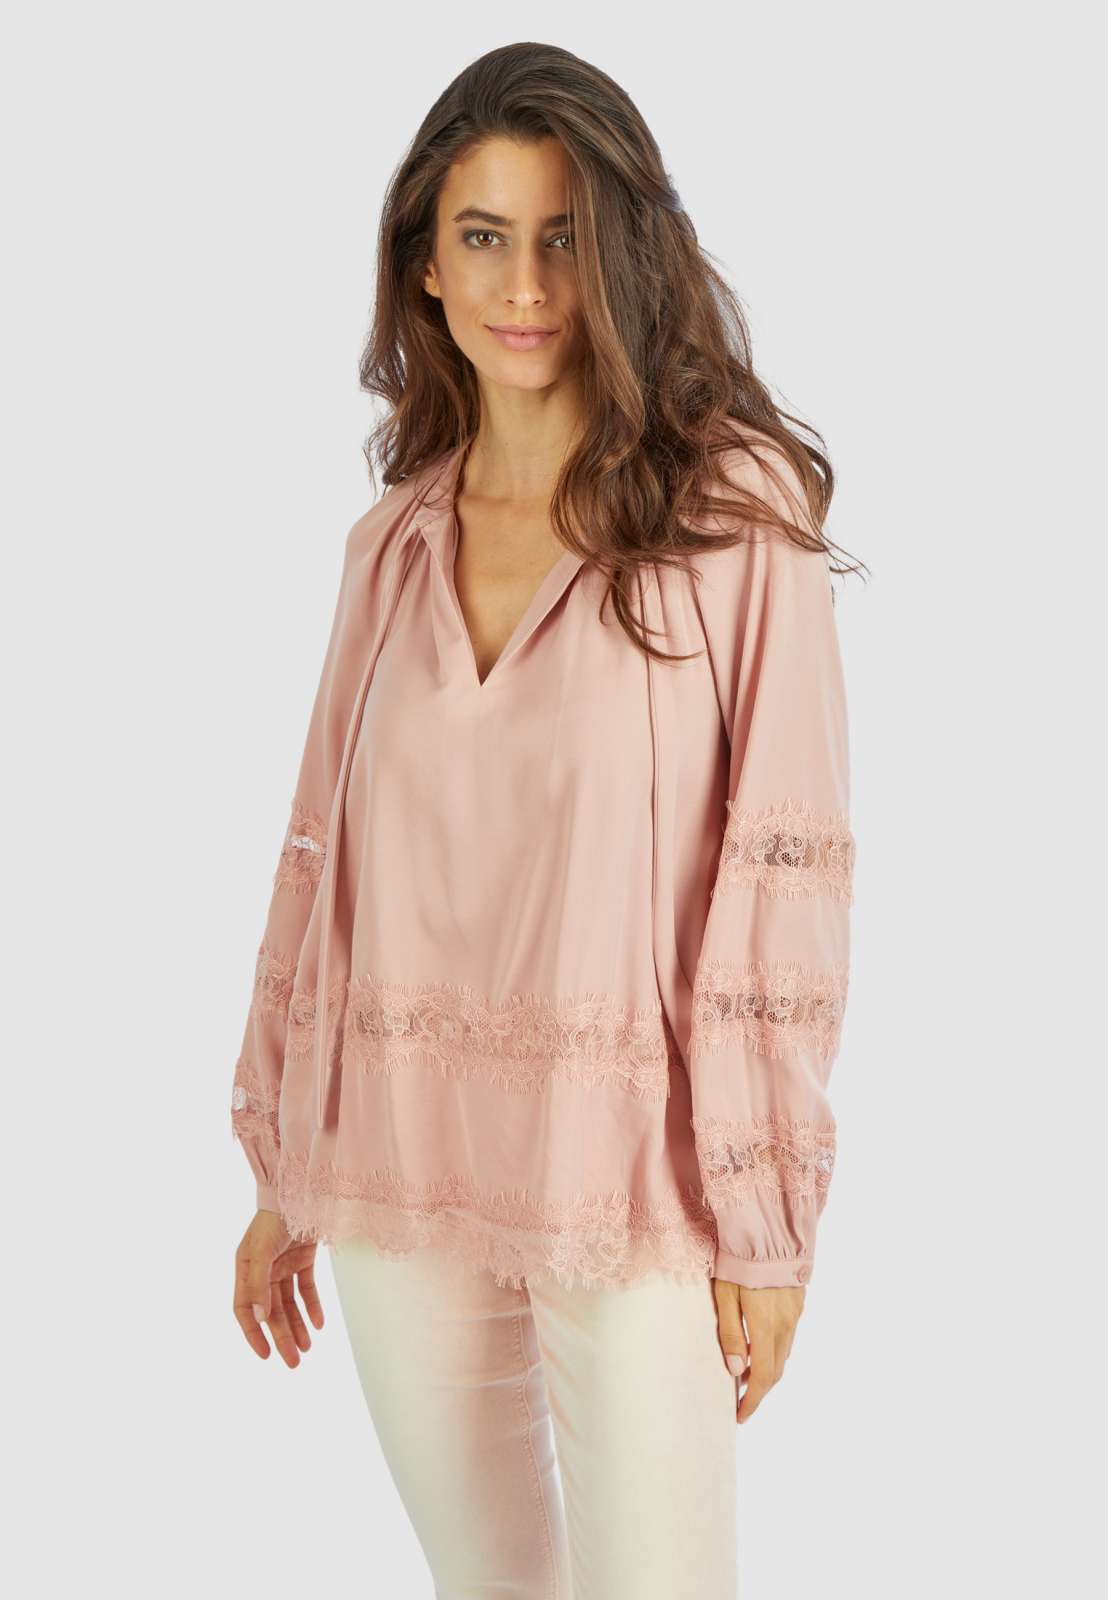 This Statement-Making Bell-Sleeve Shirt Is a Fall Fashion Trend That's  Perfect for Going Out